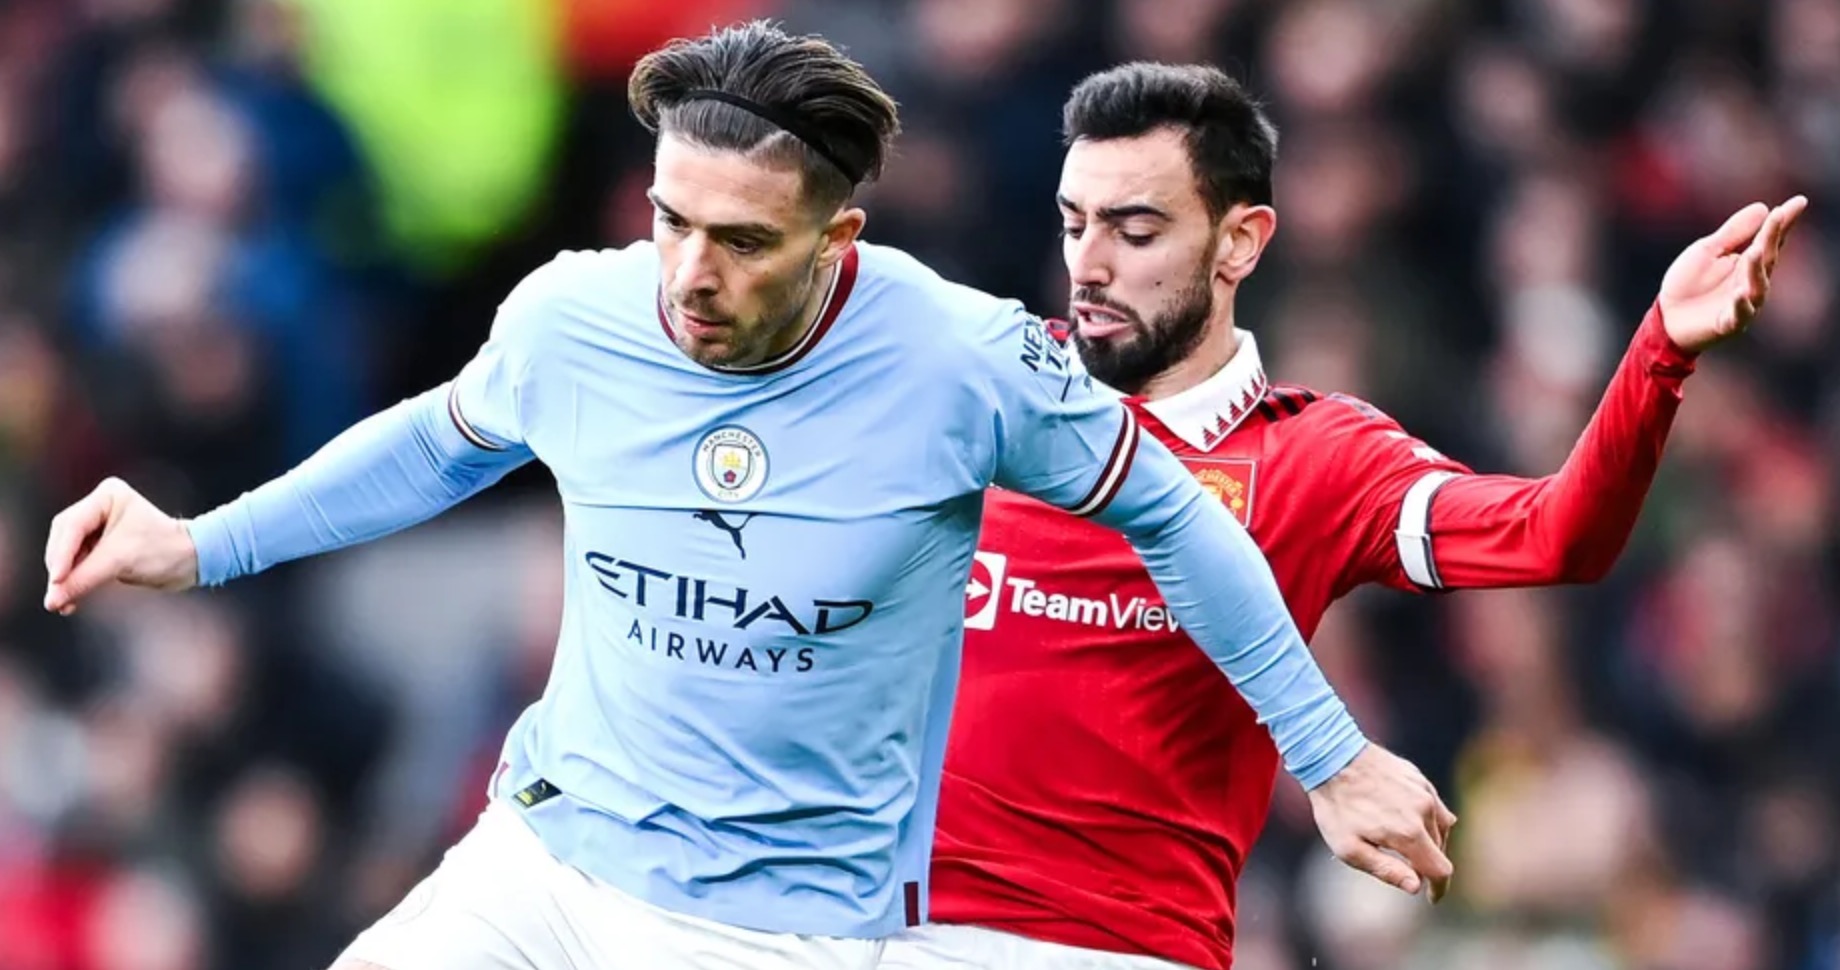 Manchester City Beats Manchester United 2-1 in FA Cup Final - Watch